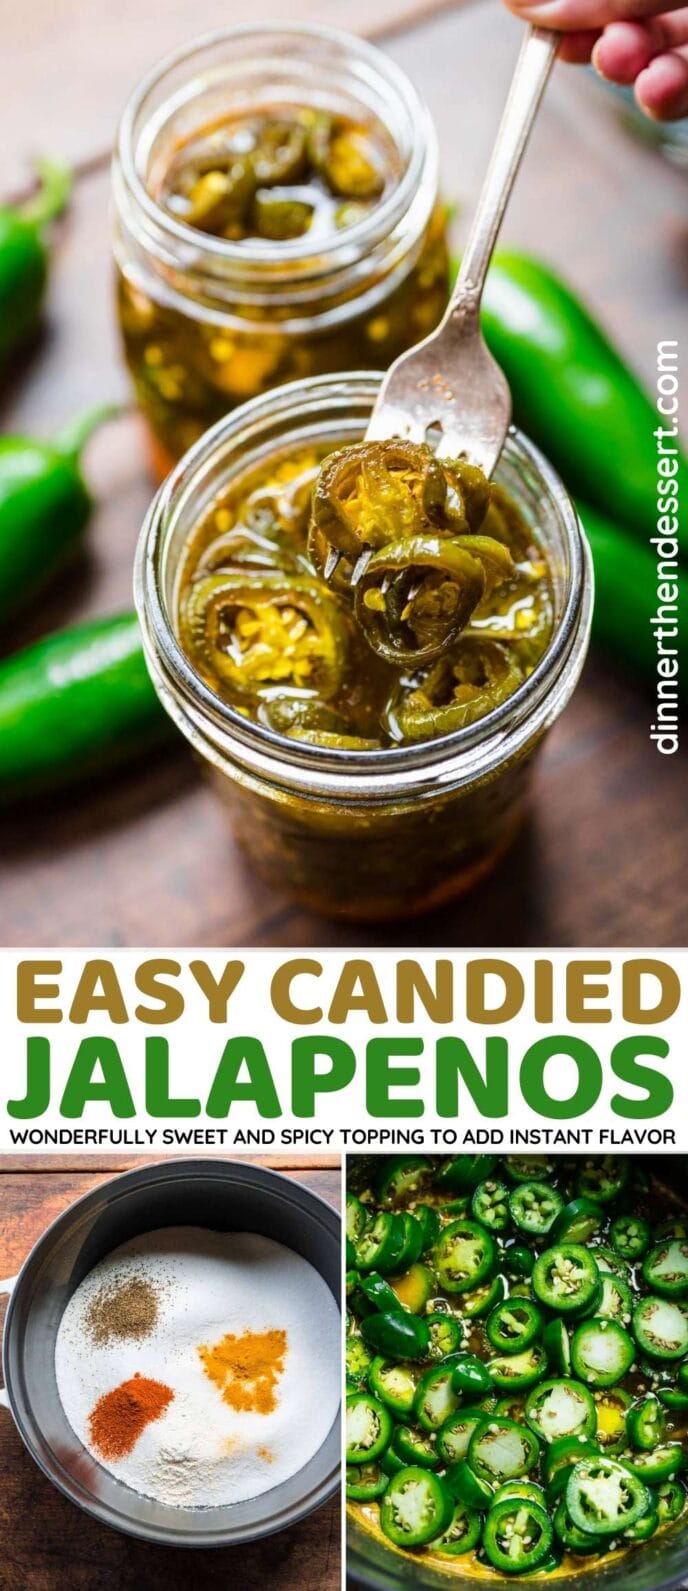 Candied Jalapenos collage